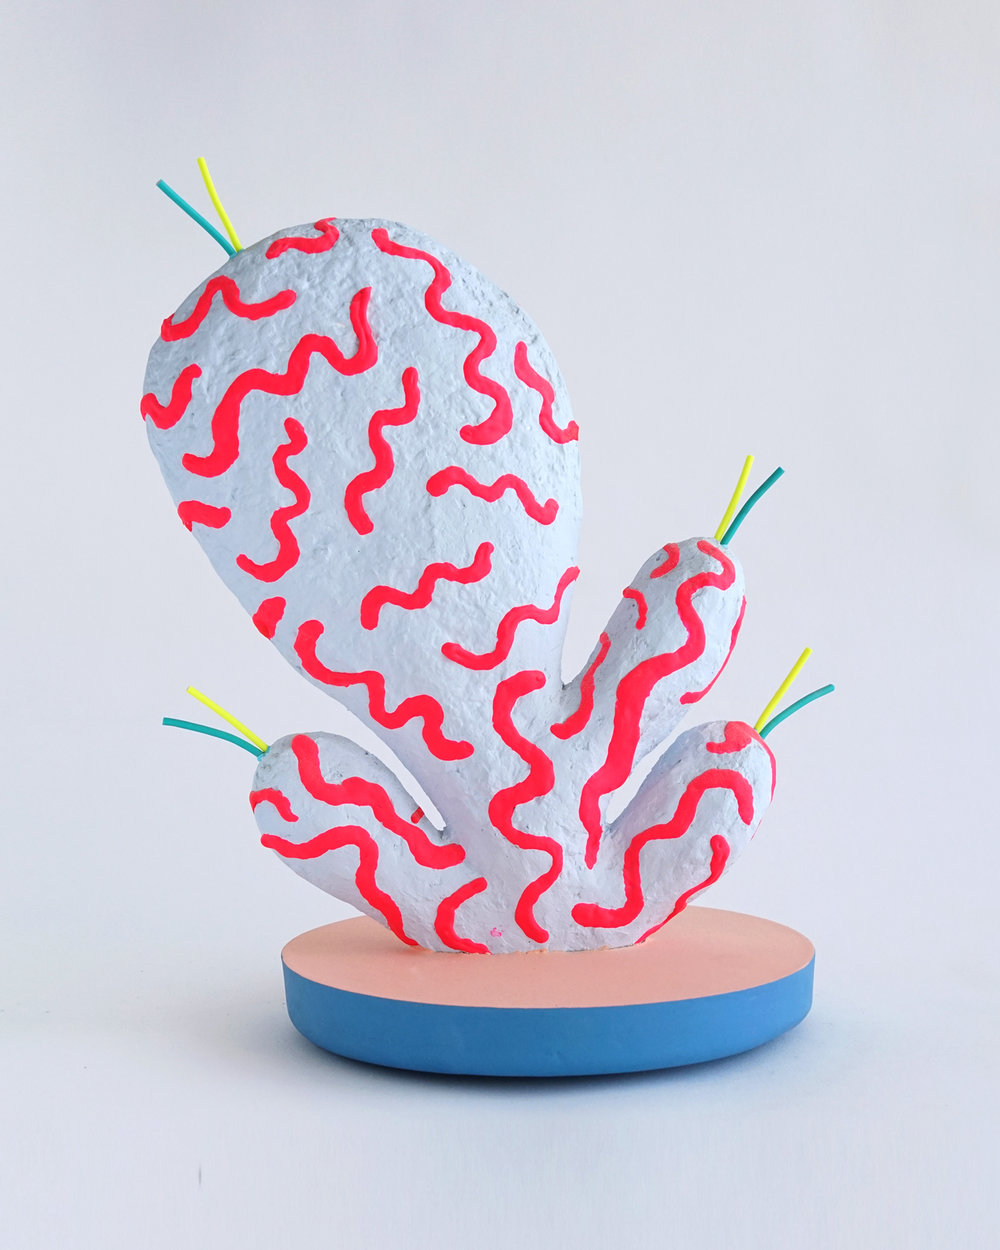 ADAM FREZZA + TERRI CHIAO - Squiggle PaddleAcrylic and rubber tubing on paper pulp and plaster with painted concrete base11 x 8 x 13”